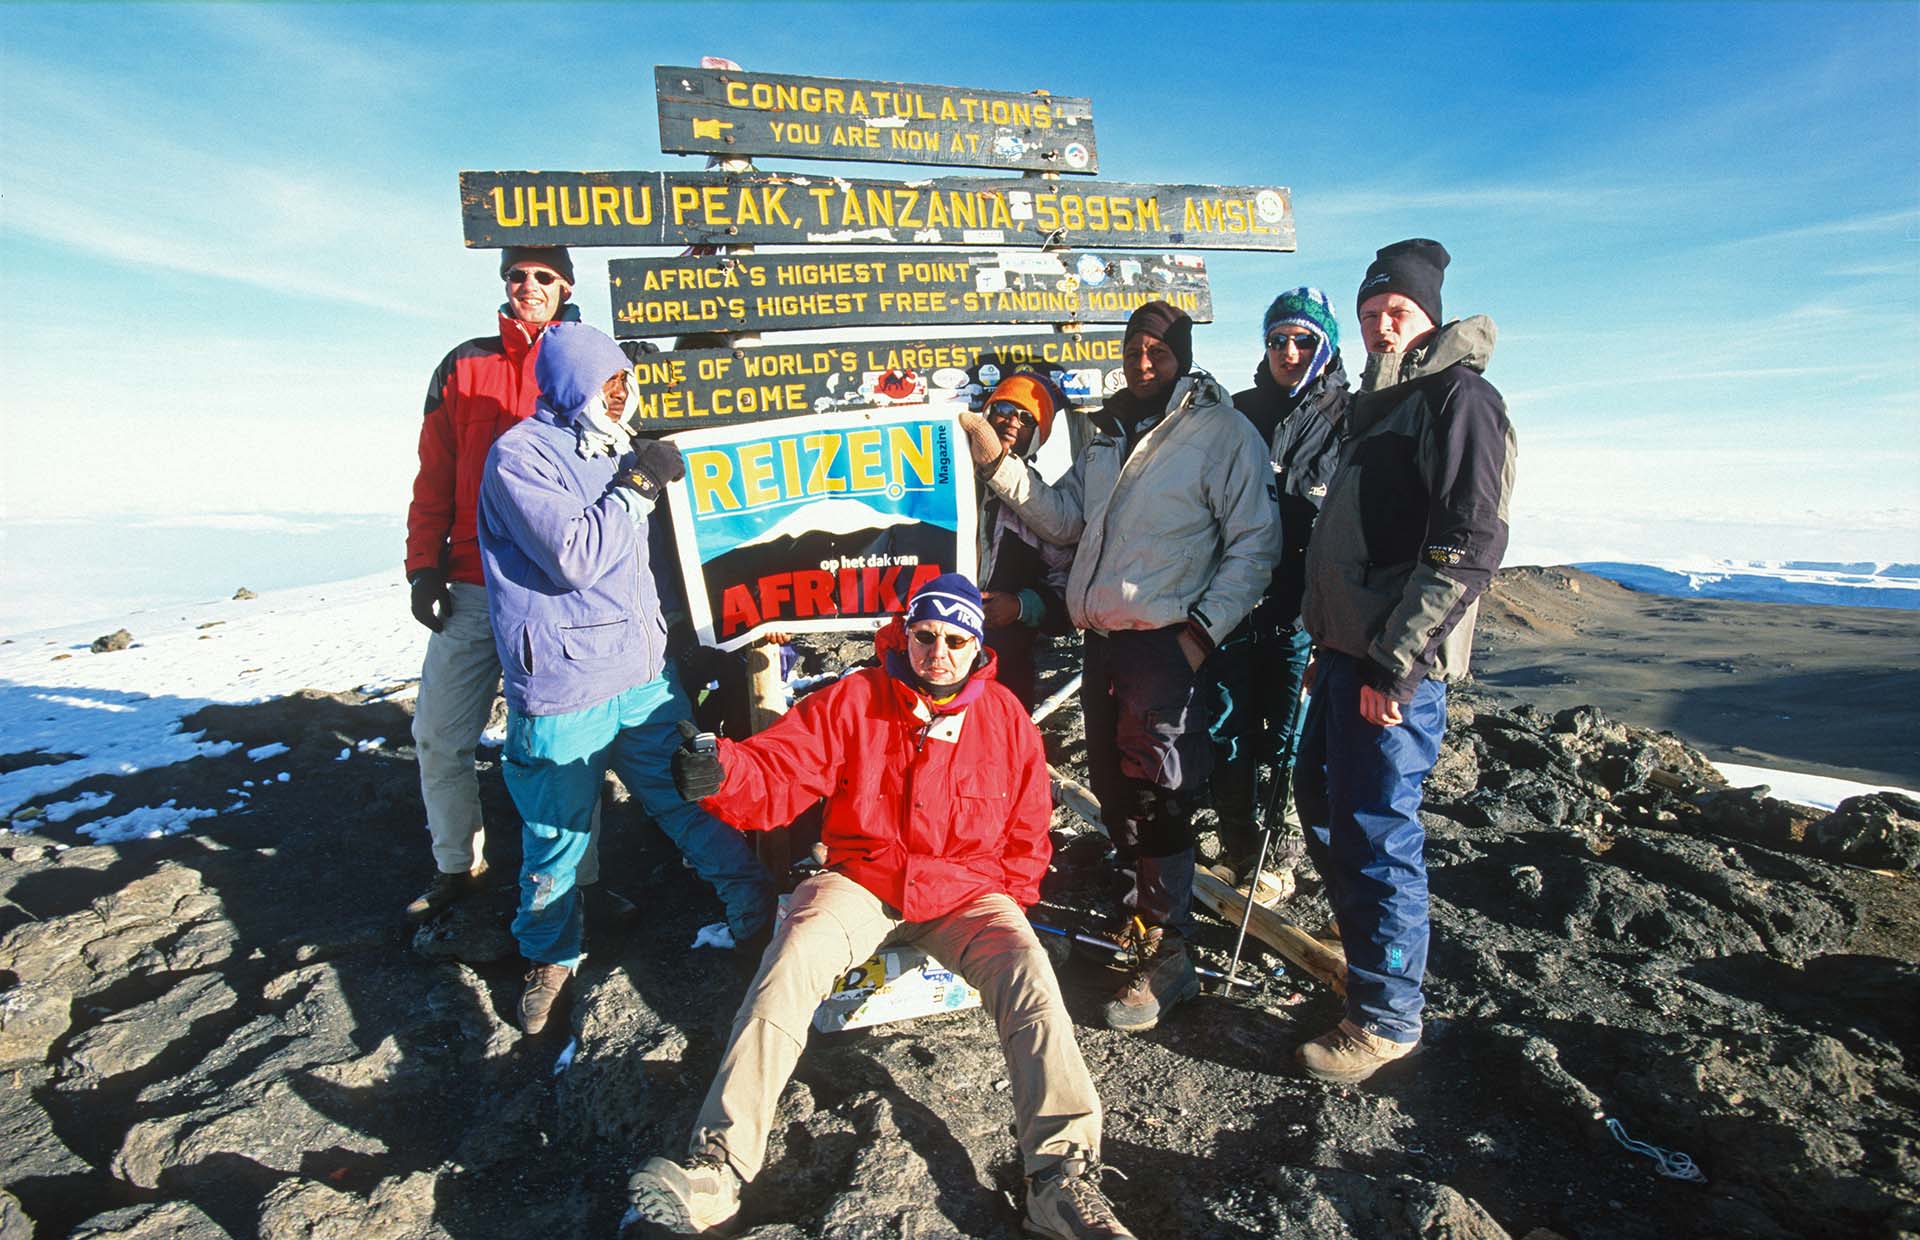 Martin van Lokven on top of Kilimanjaro mountain in 2005, for the Dutch travel magazine ANWB Reizen. With then magazine editor and writer Jacques van der Linden.